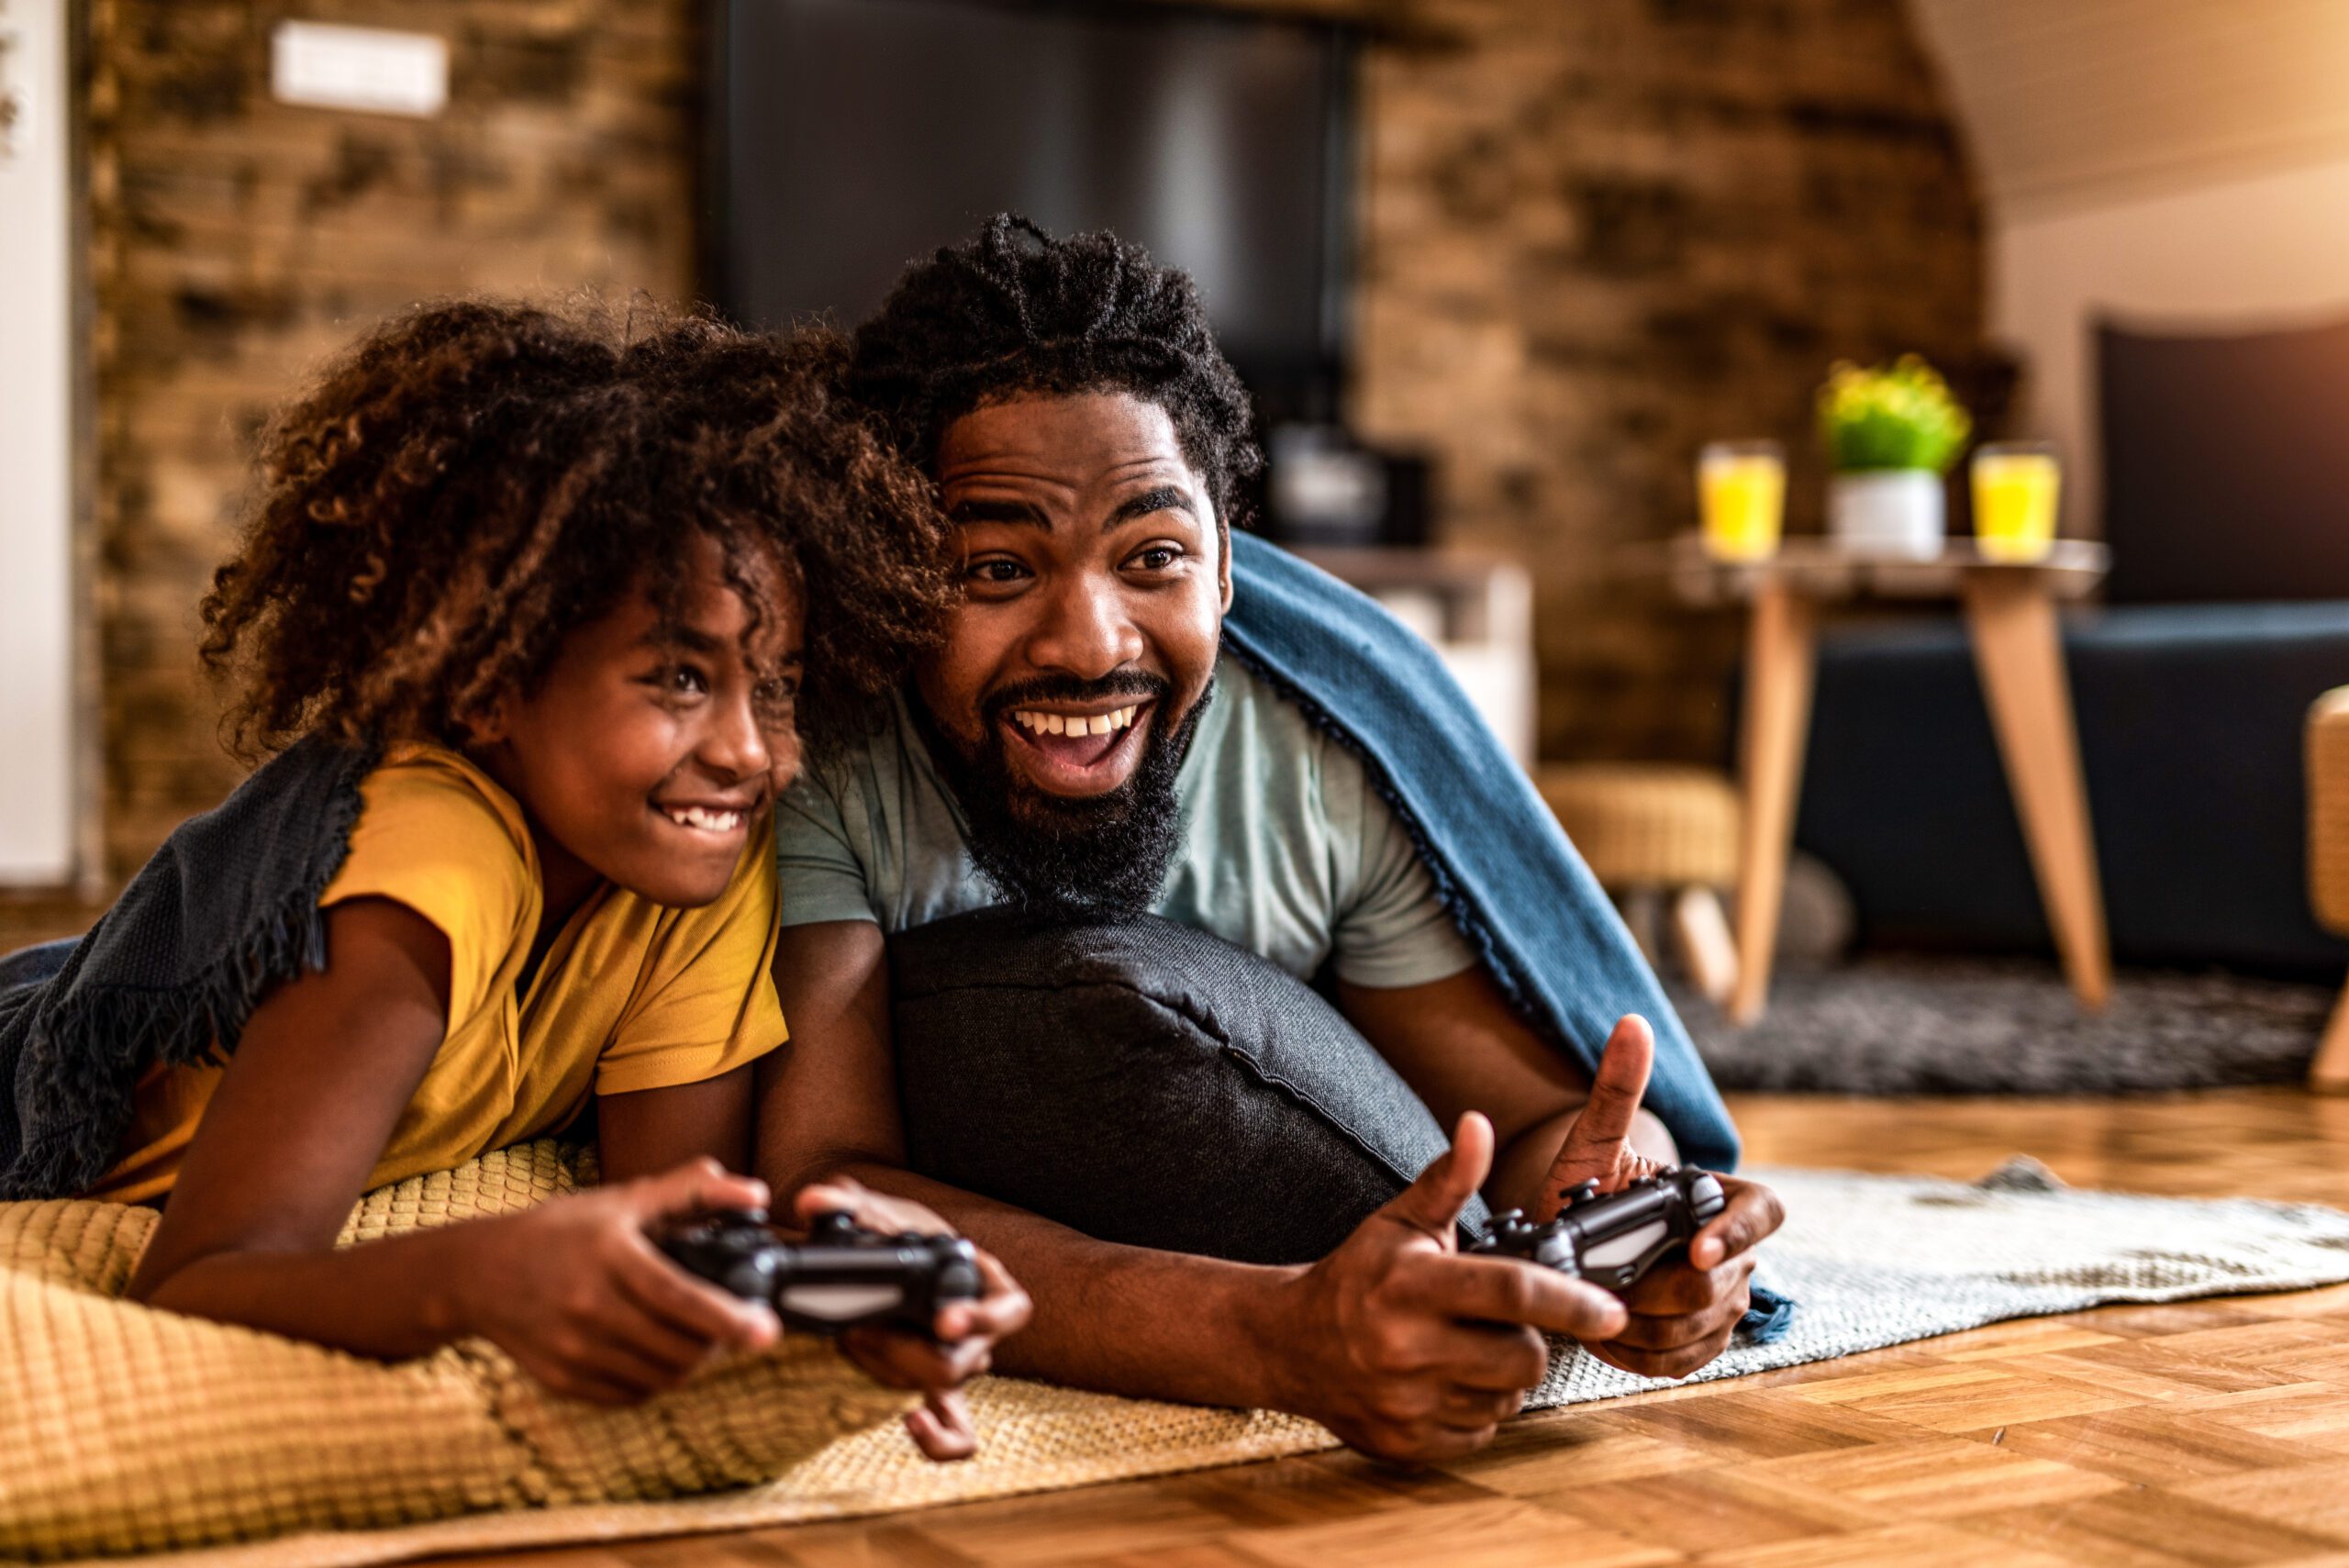 How to prepare your home for summer gaming